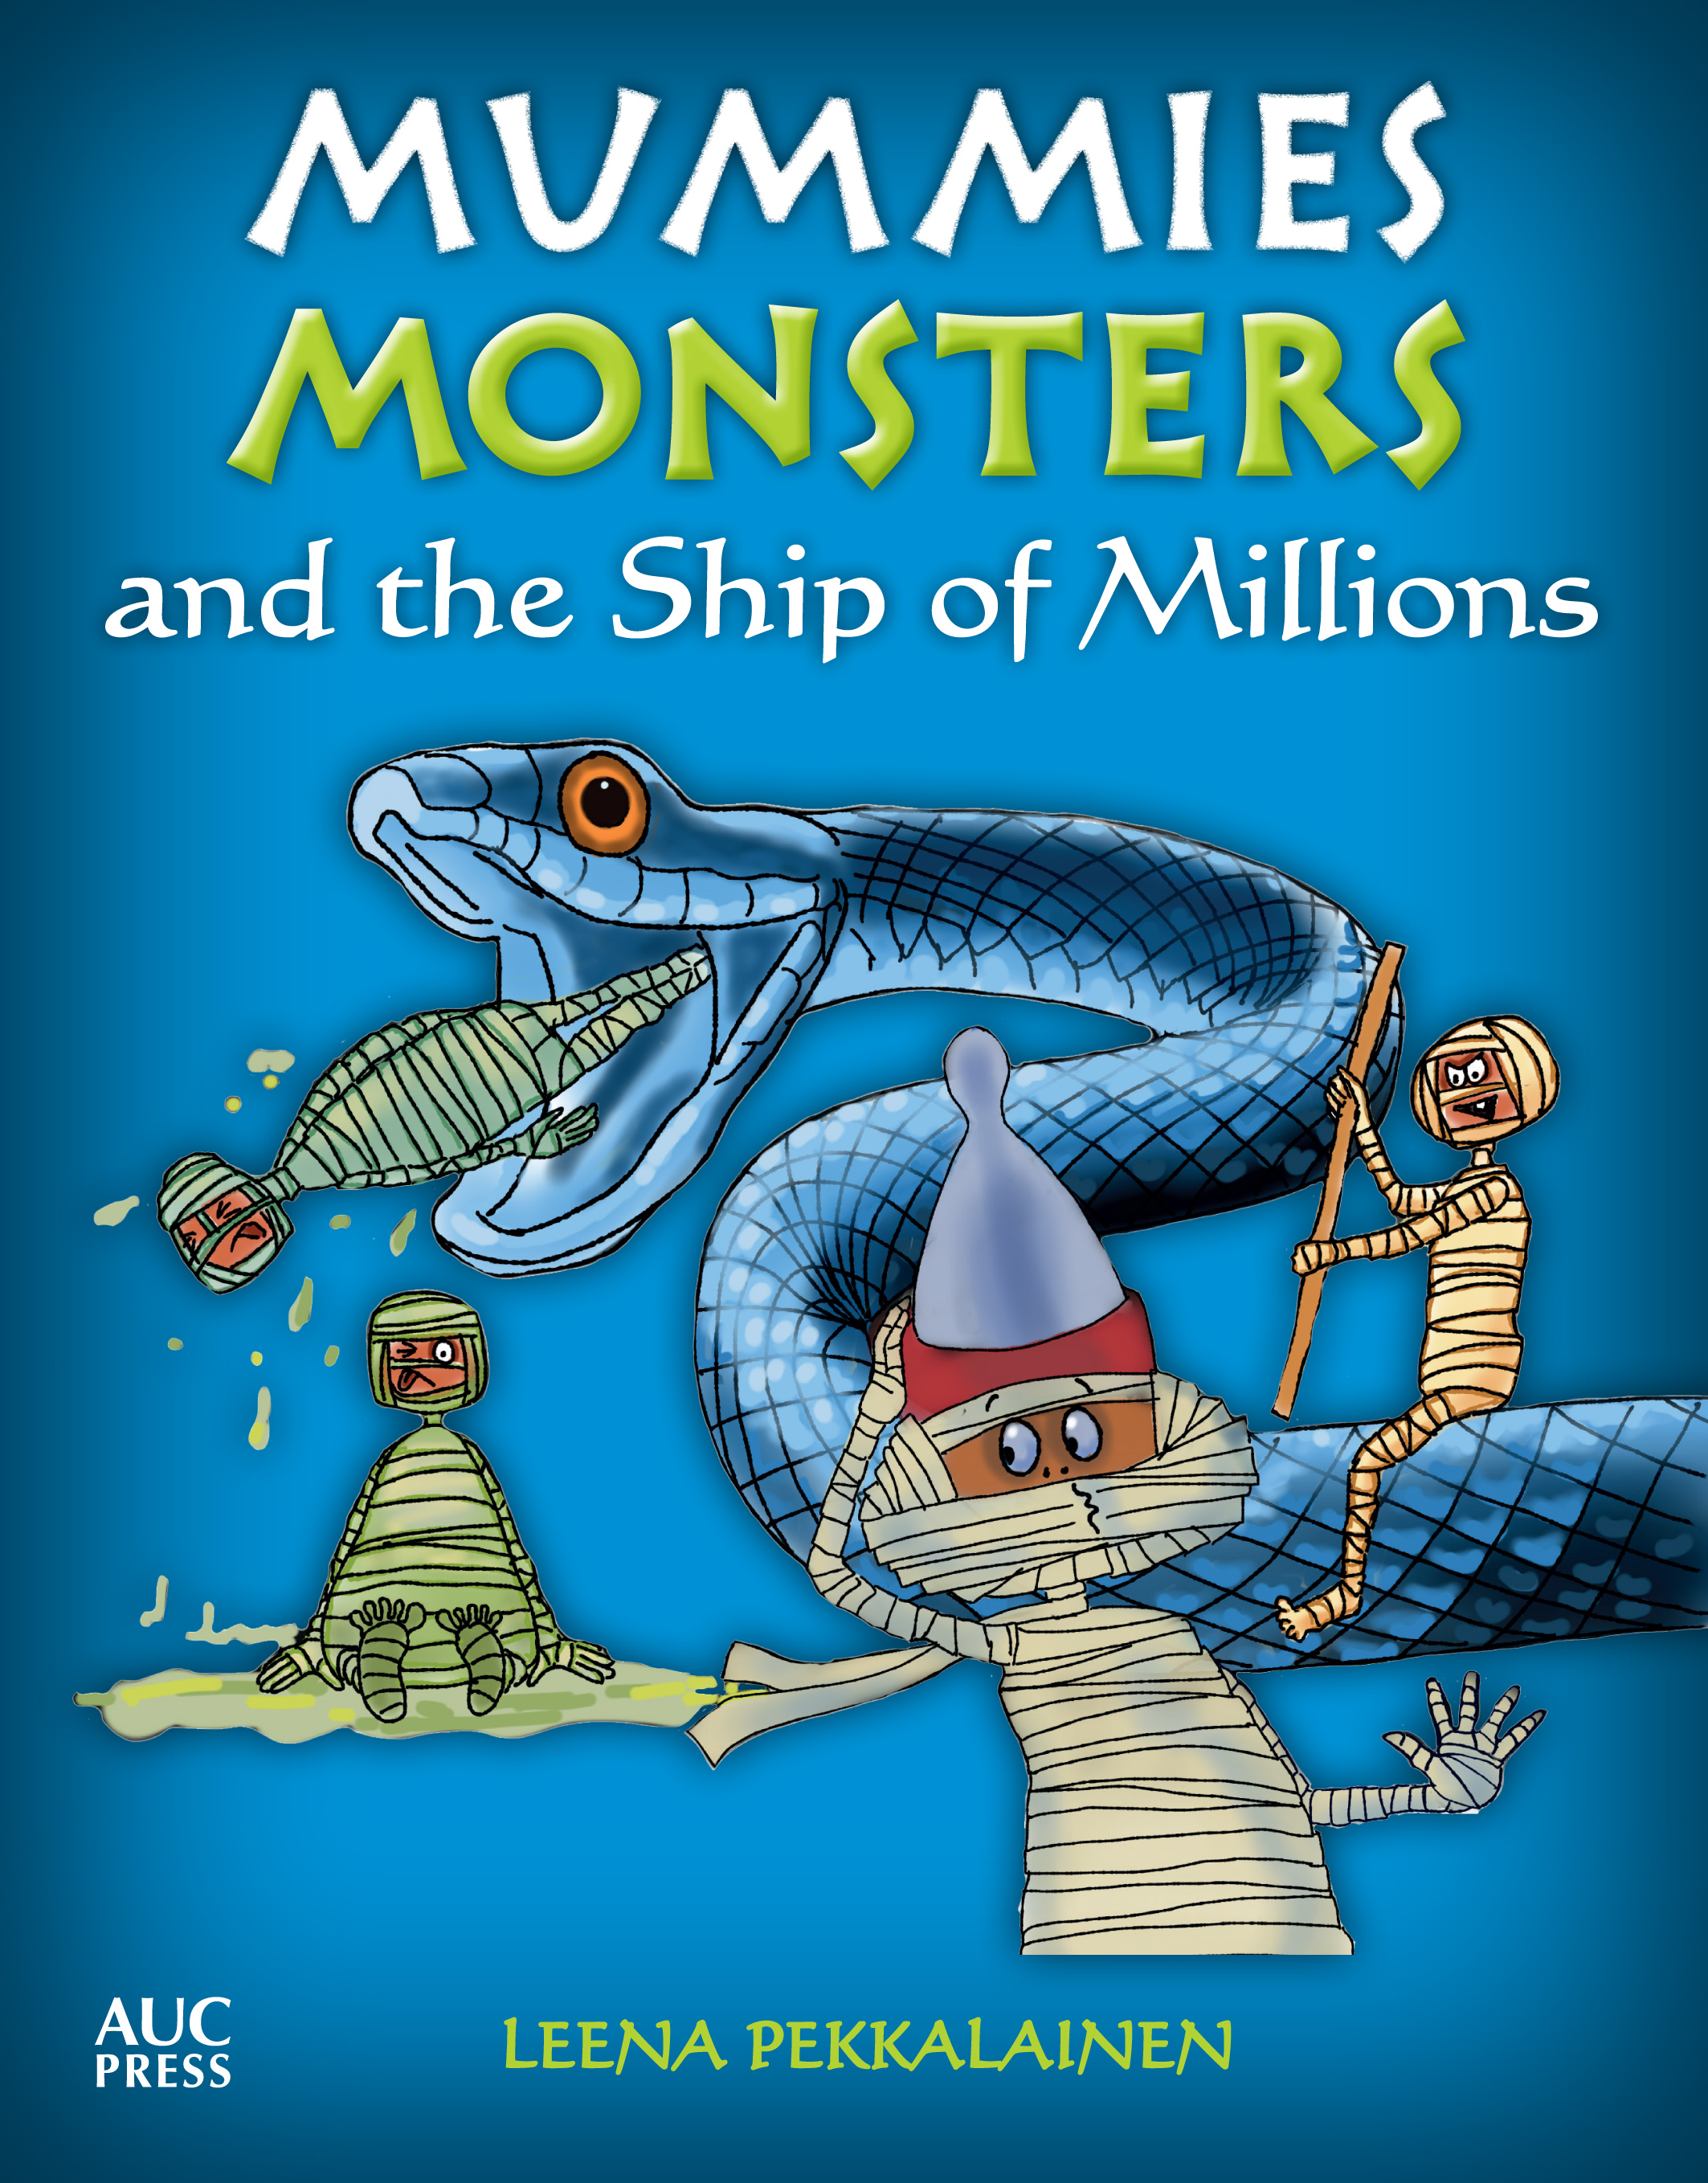 Mummies, Monsters and the Ship of Millions